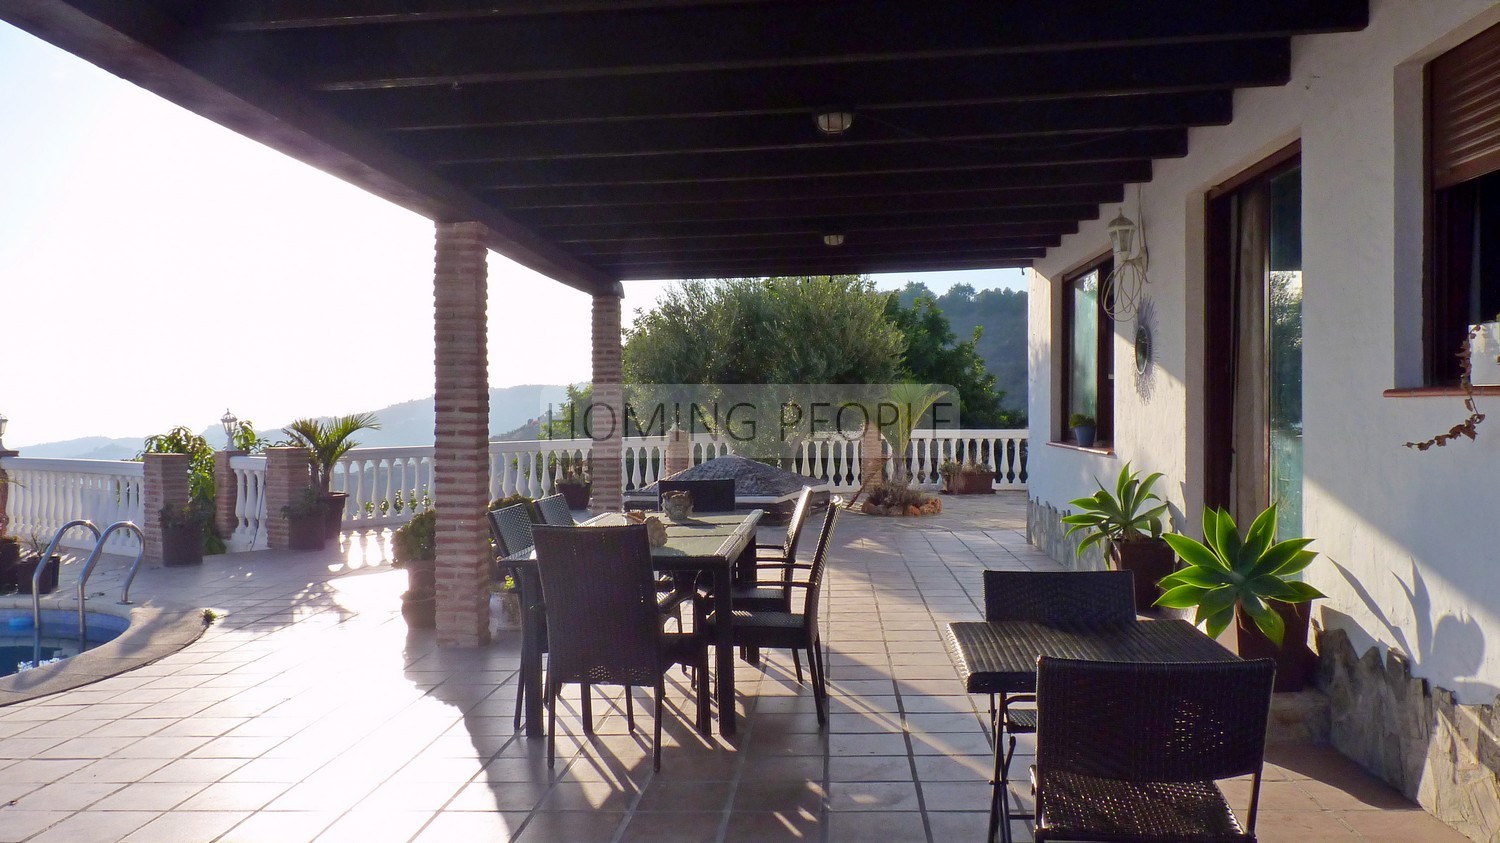 Country villa with swimming pool and guest house. Breathtaking views and good access!